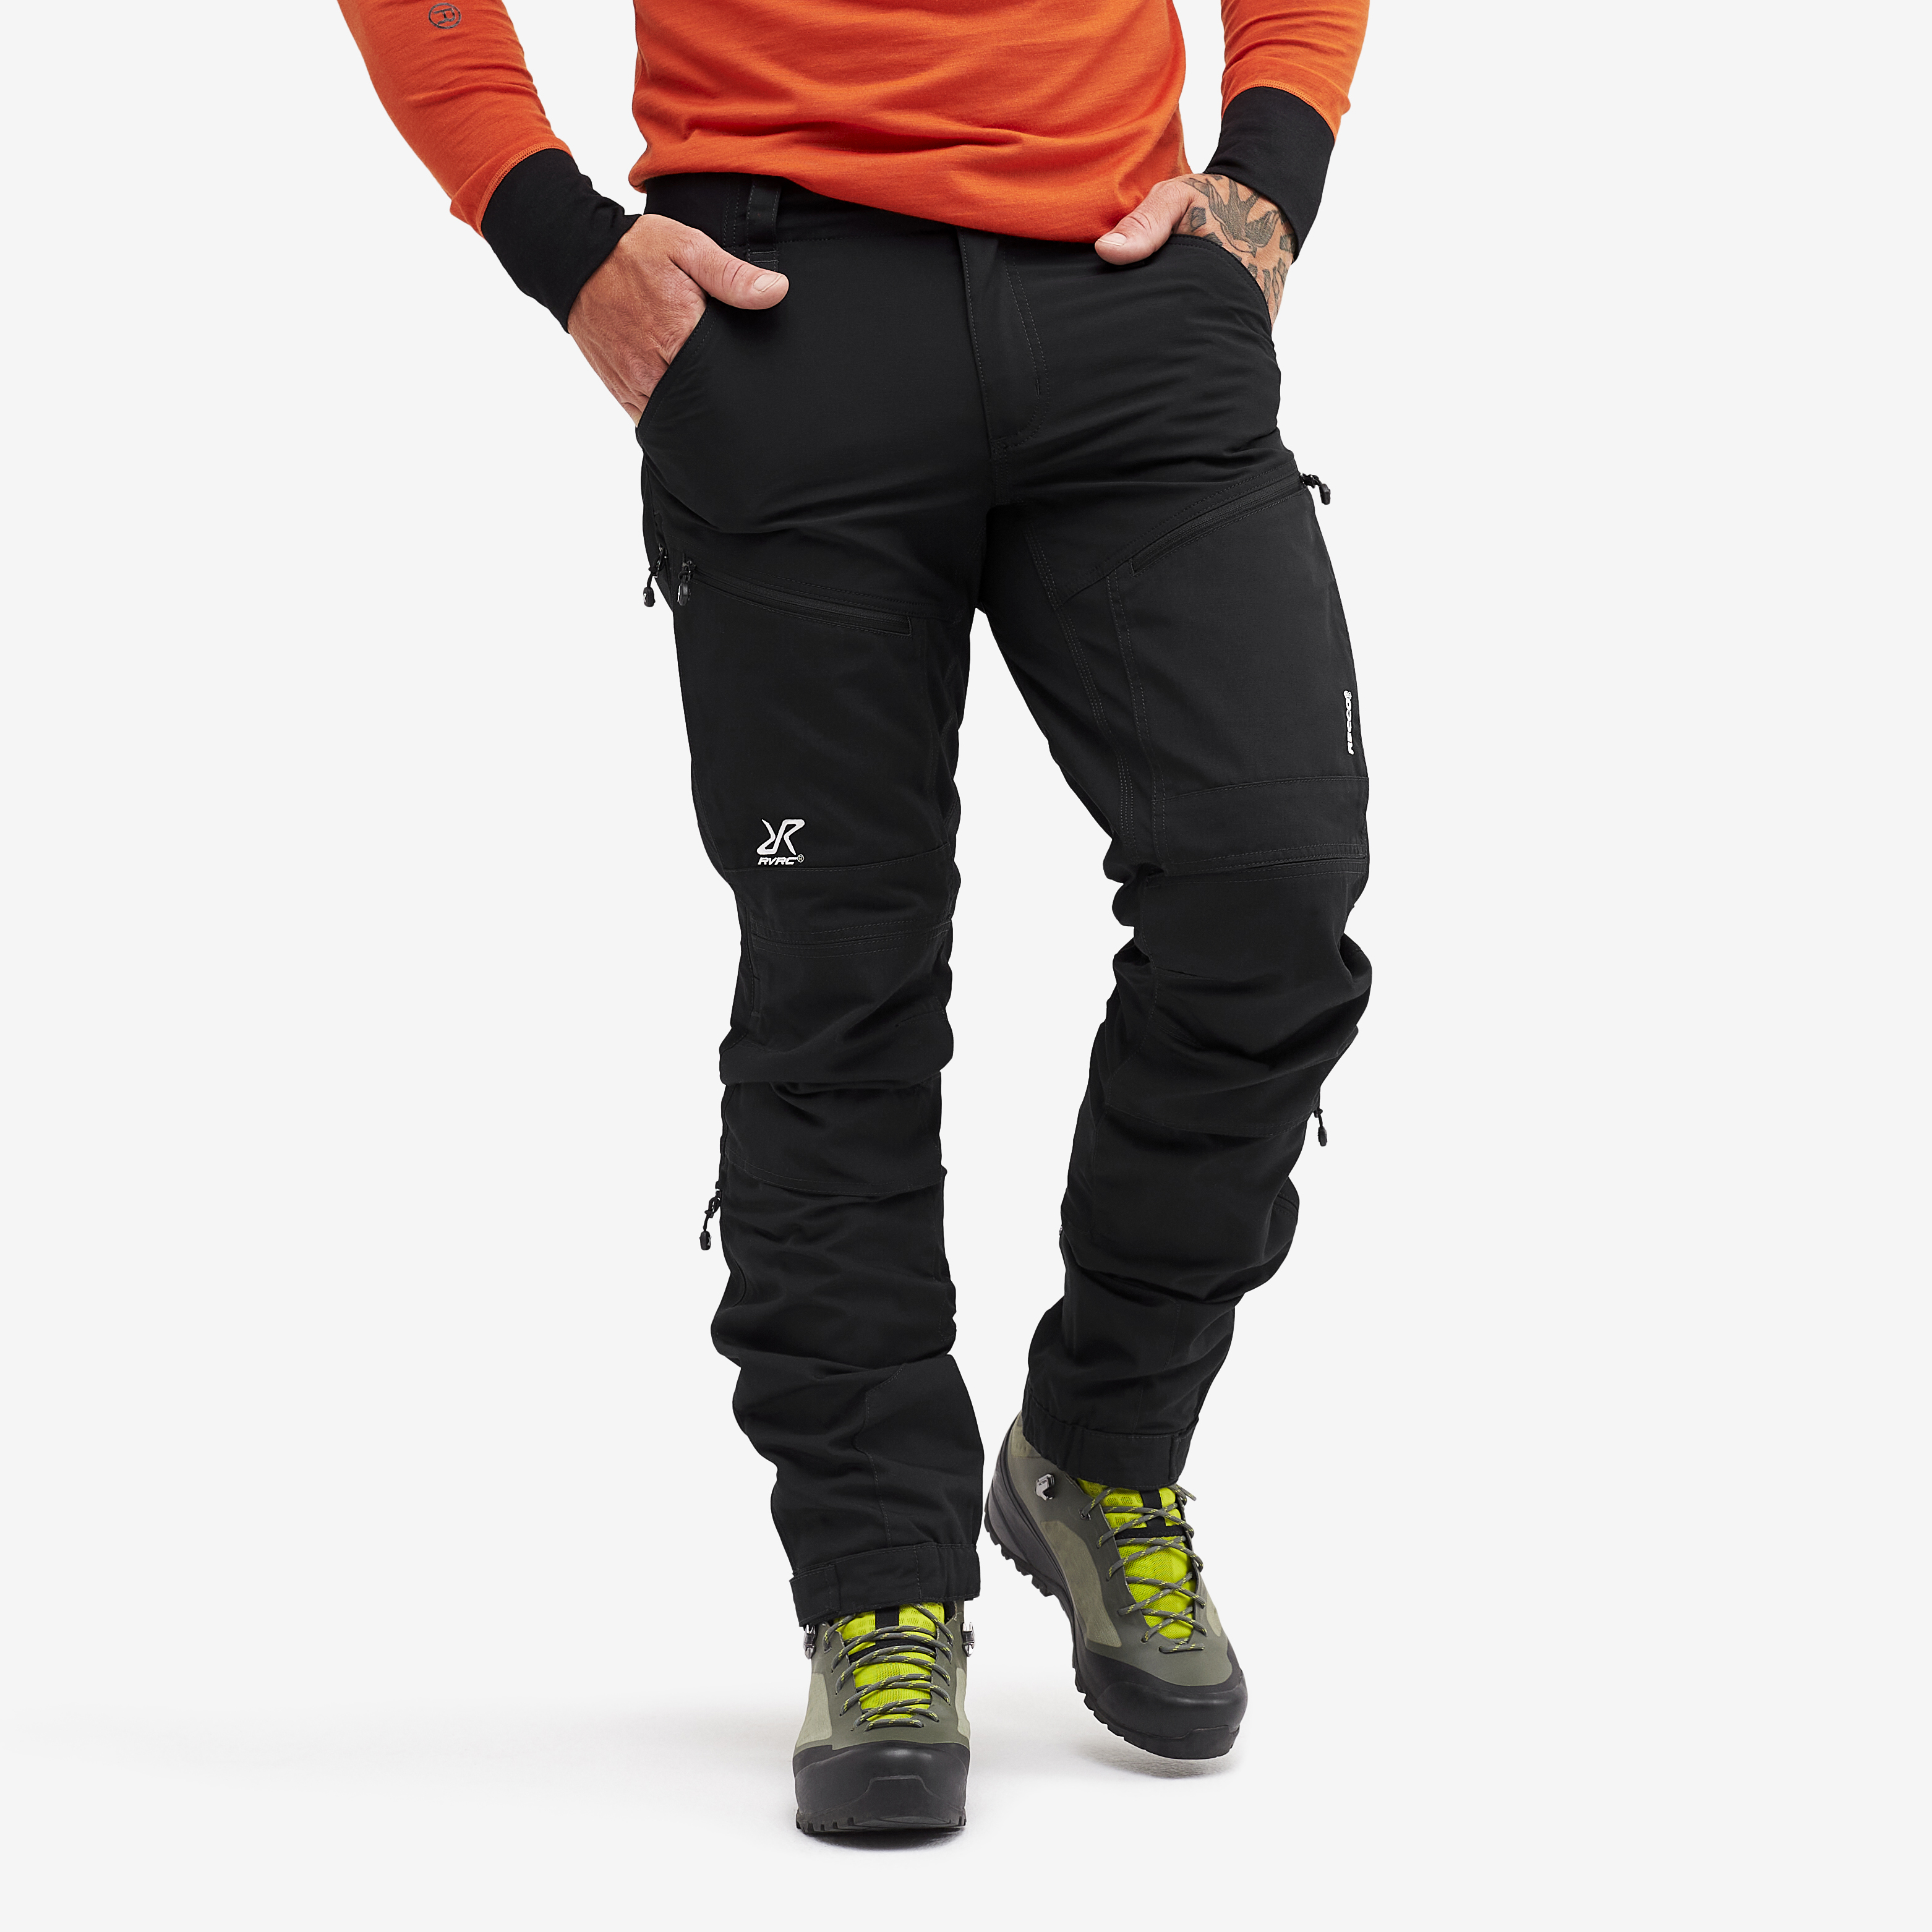 RVRC GP Pro Rescue hiking trousers for men in black